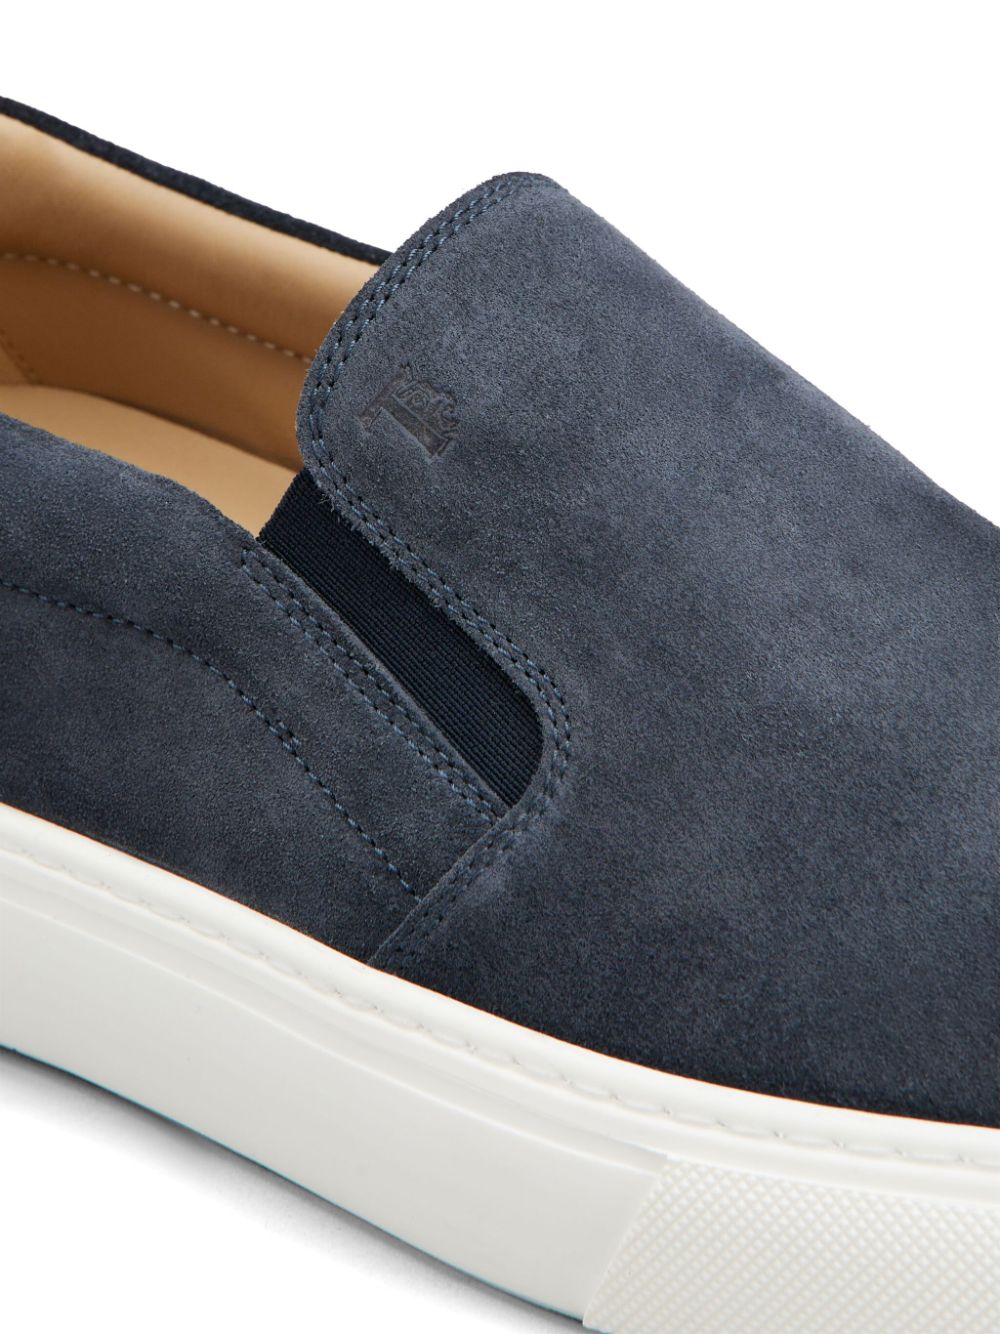 Tod's Sneakers Blue